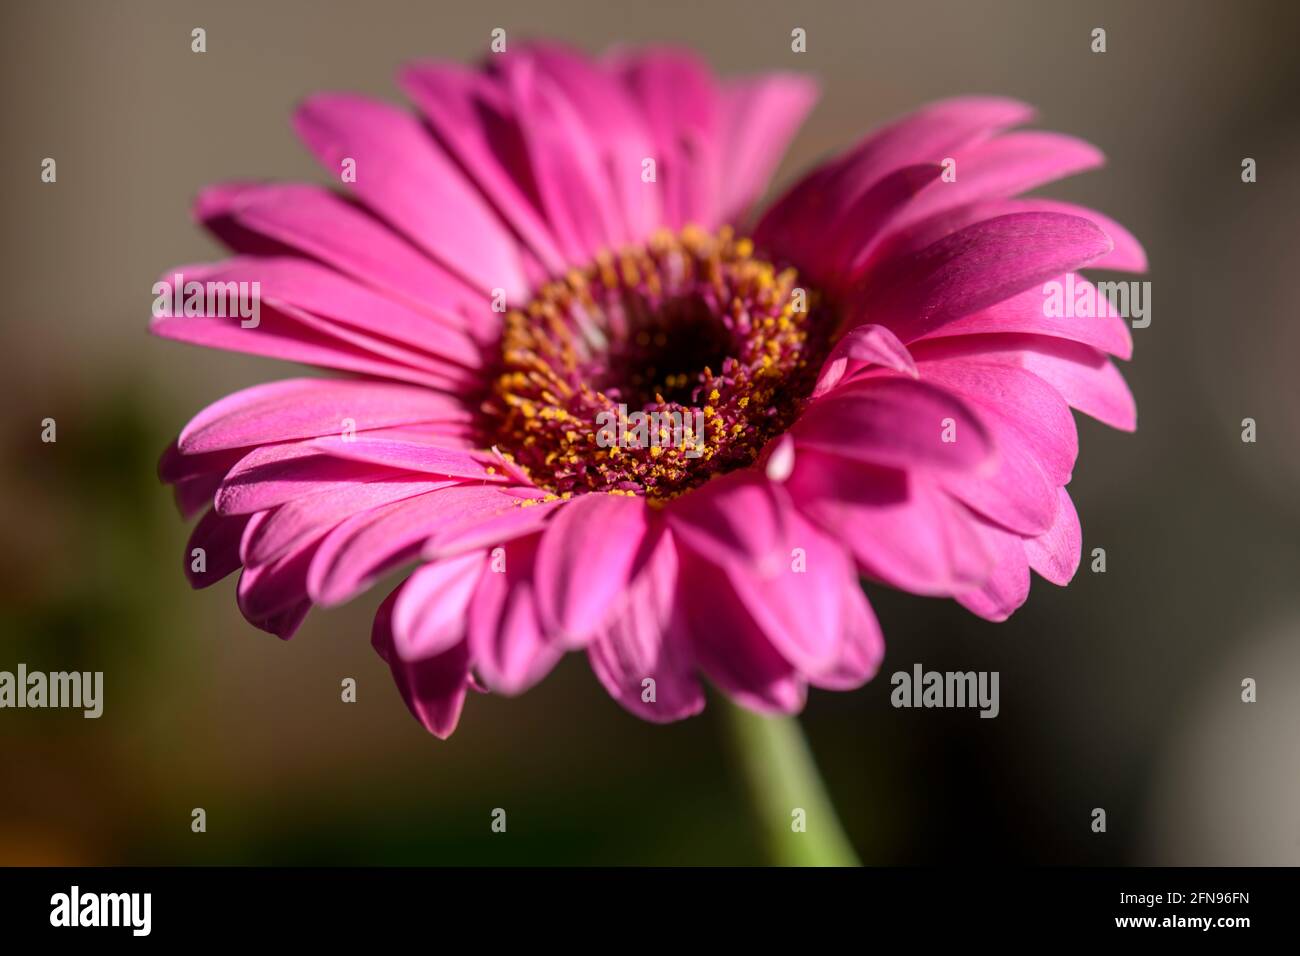 A close-up view of the beautiful pink flowers of a gerbera against a blurred background. Stock Photo